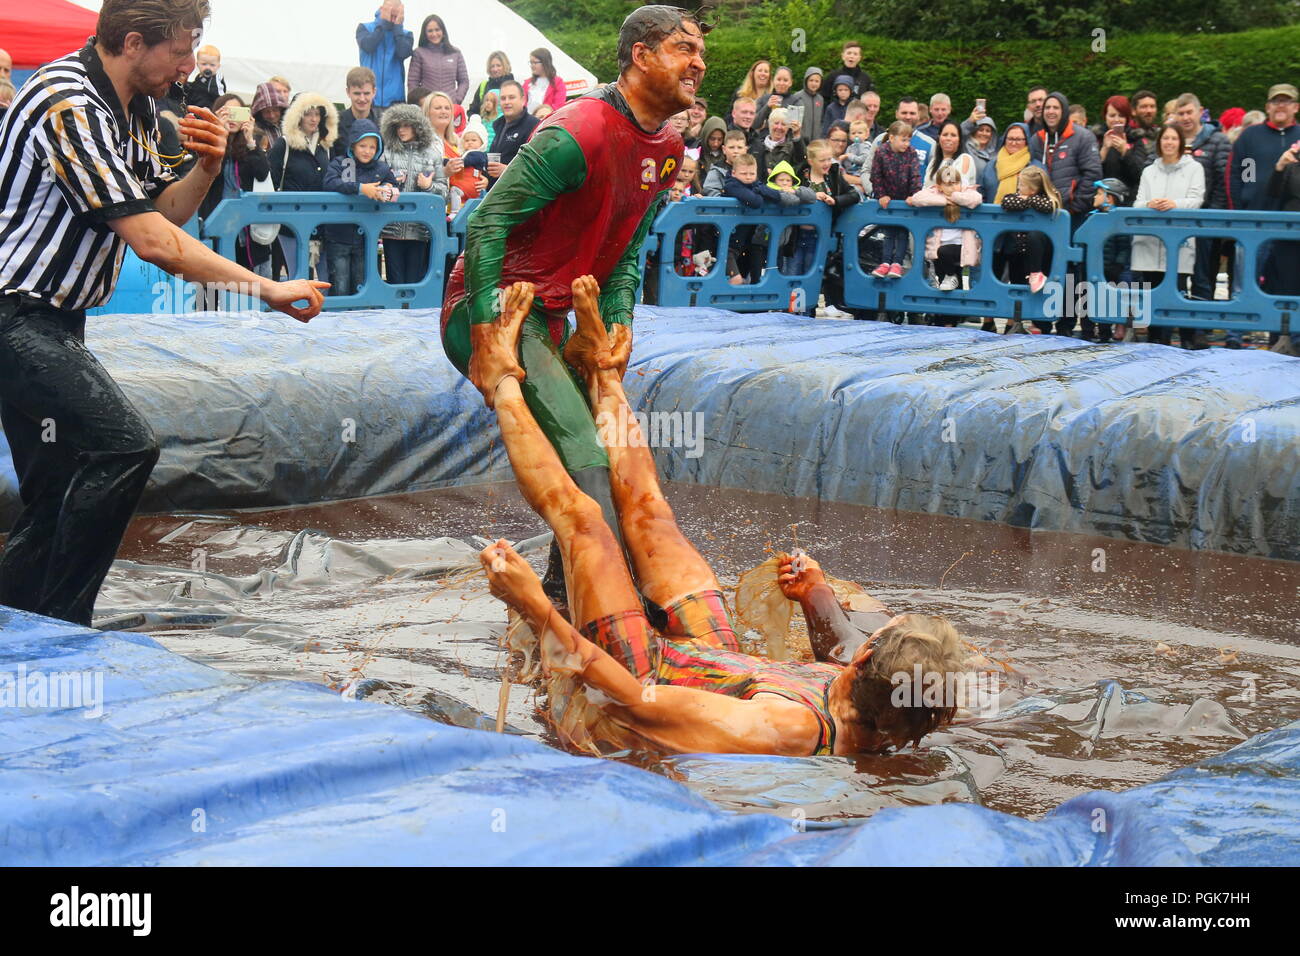 Stacksteads, Bacup, Lancashire, UK. 27 August 2018.The  World Gravy Wrestling Championships at the Rose ‘n Bowl, Stacksteads to raise funds for the East Lancashire Hospice and competitors nominated charities.     A wild and whacky wrestling competition in a 16,000 litre pool full of Lancashire Gravy! All our contestants get sponsorship and really give it their all to raise Credit: Phil Taylor/Alamy Live News Stock Photo